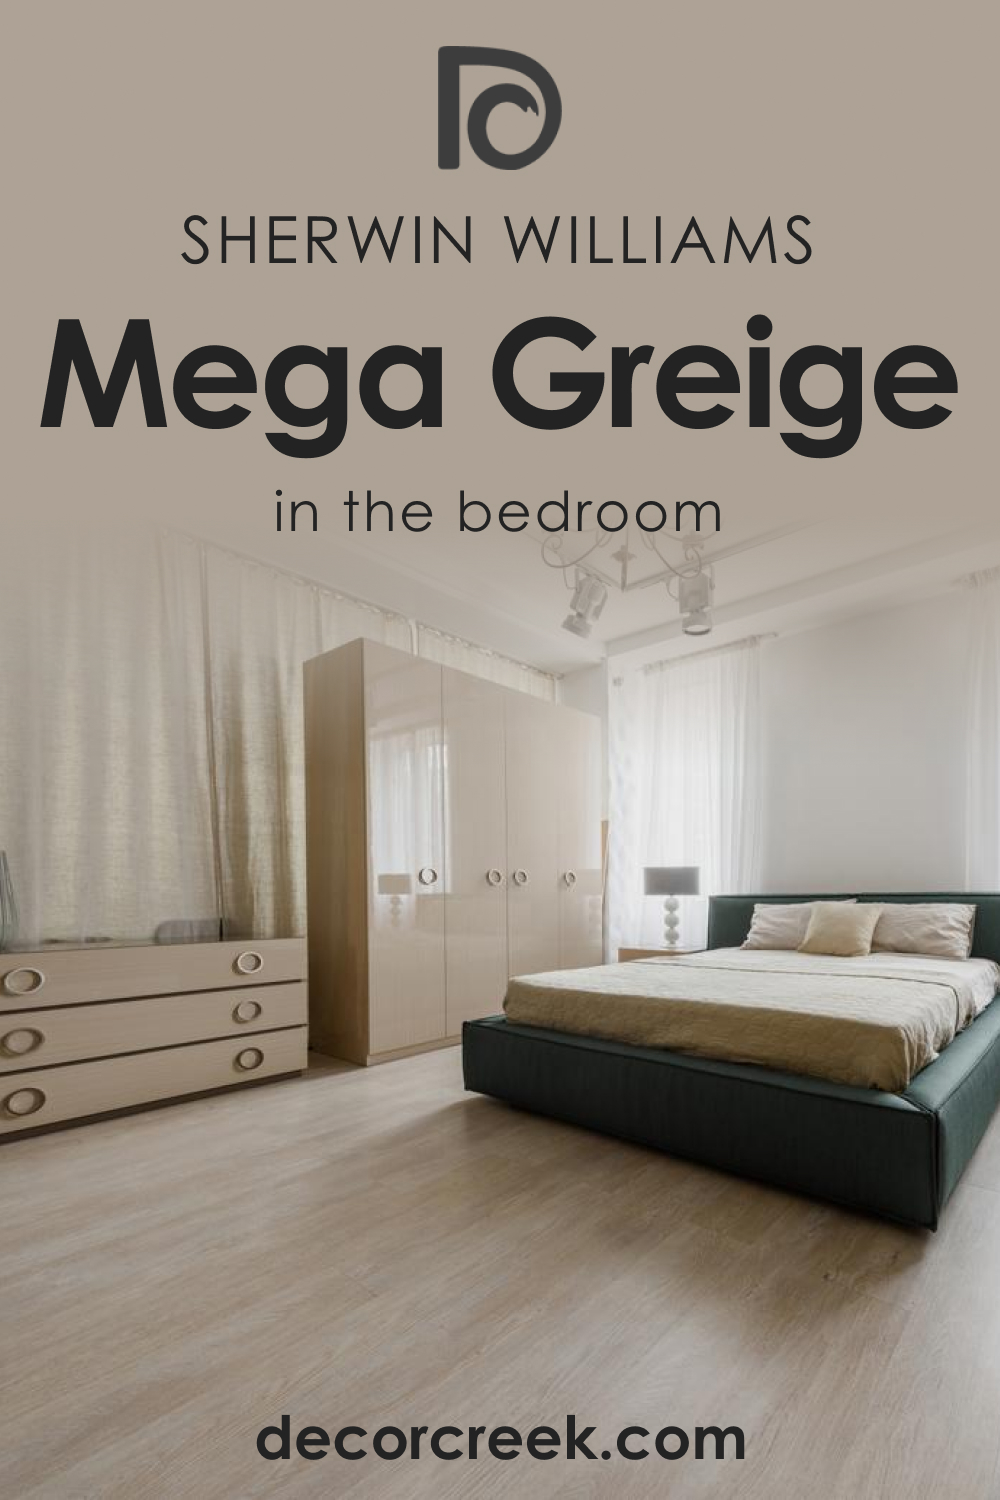 How to Use SW 7031 Mega Greige in the Bedroom?